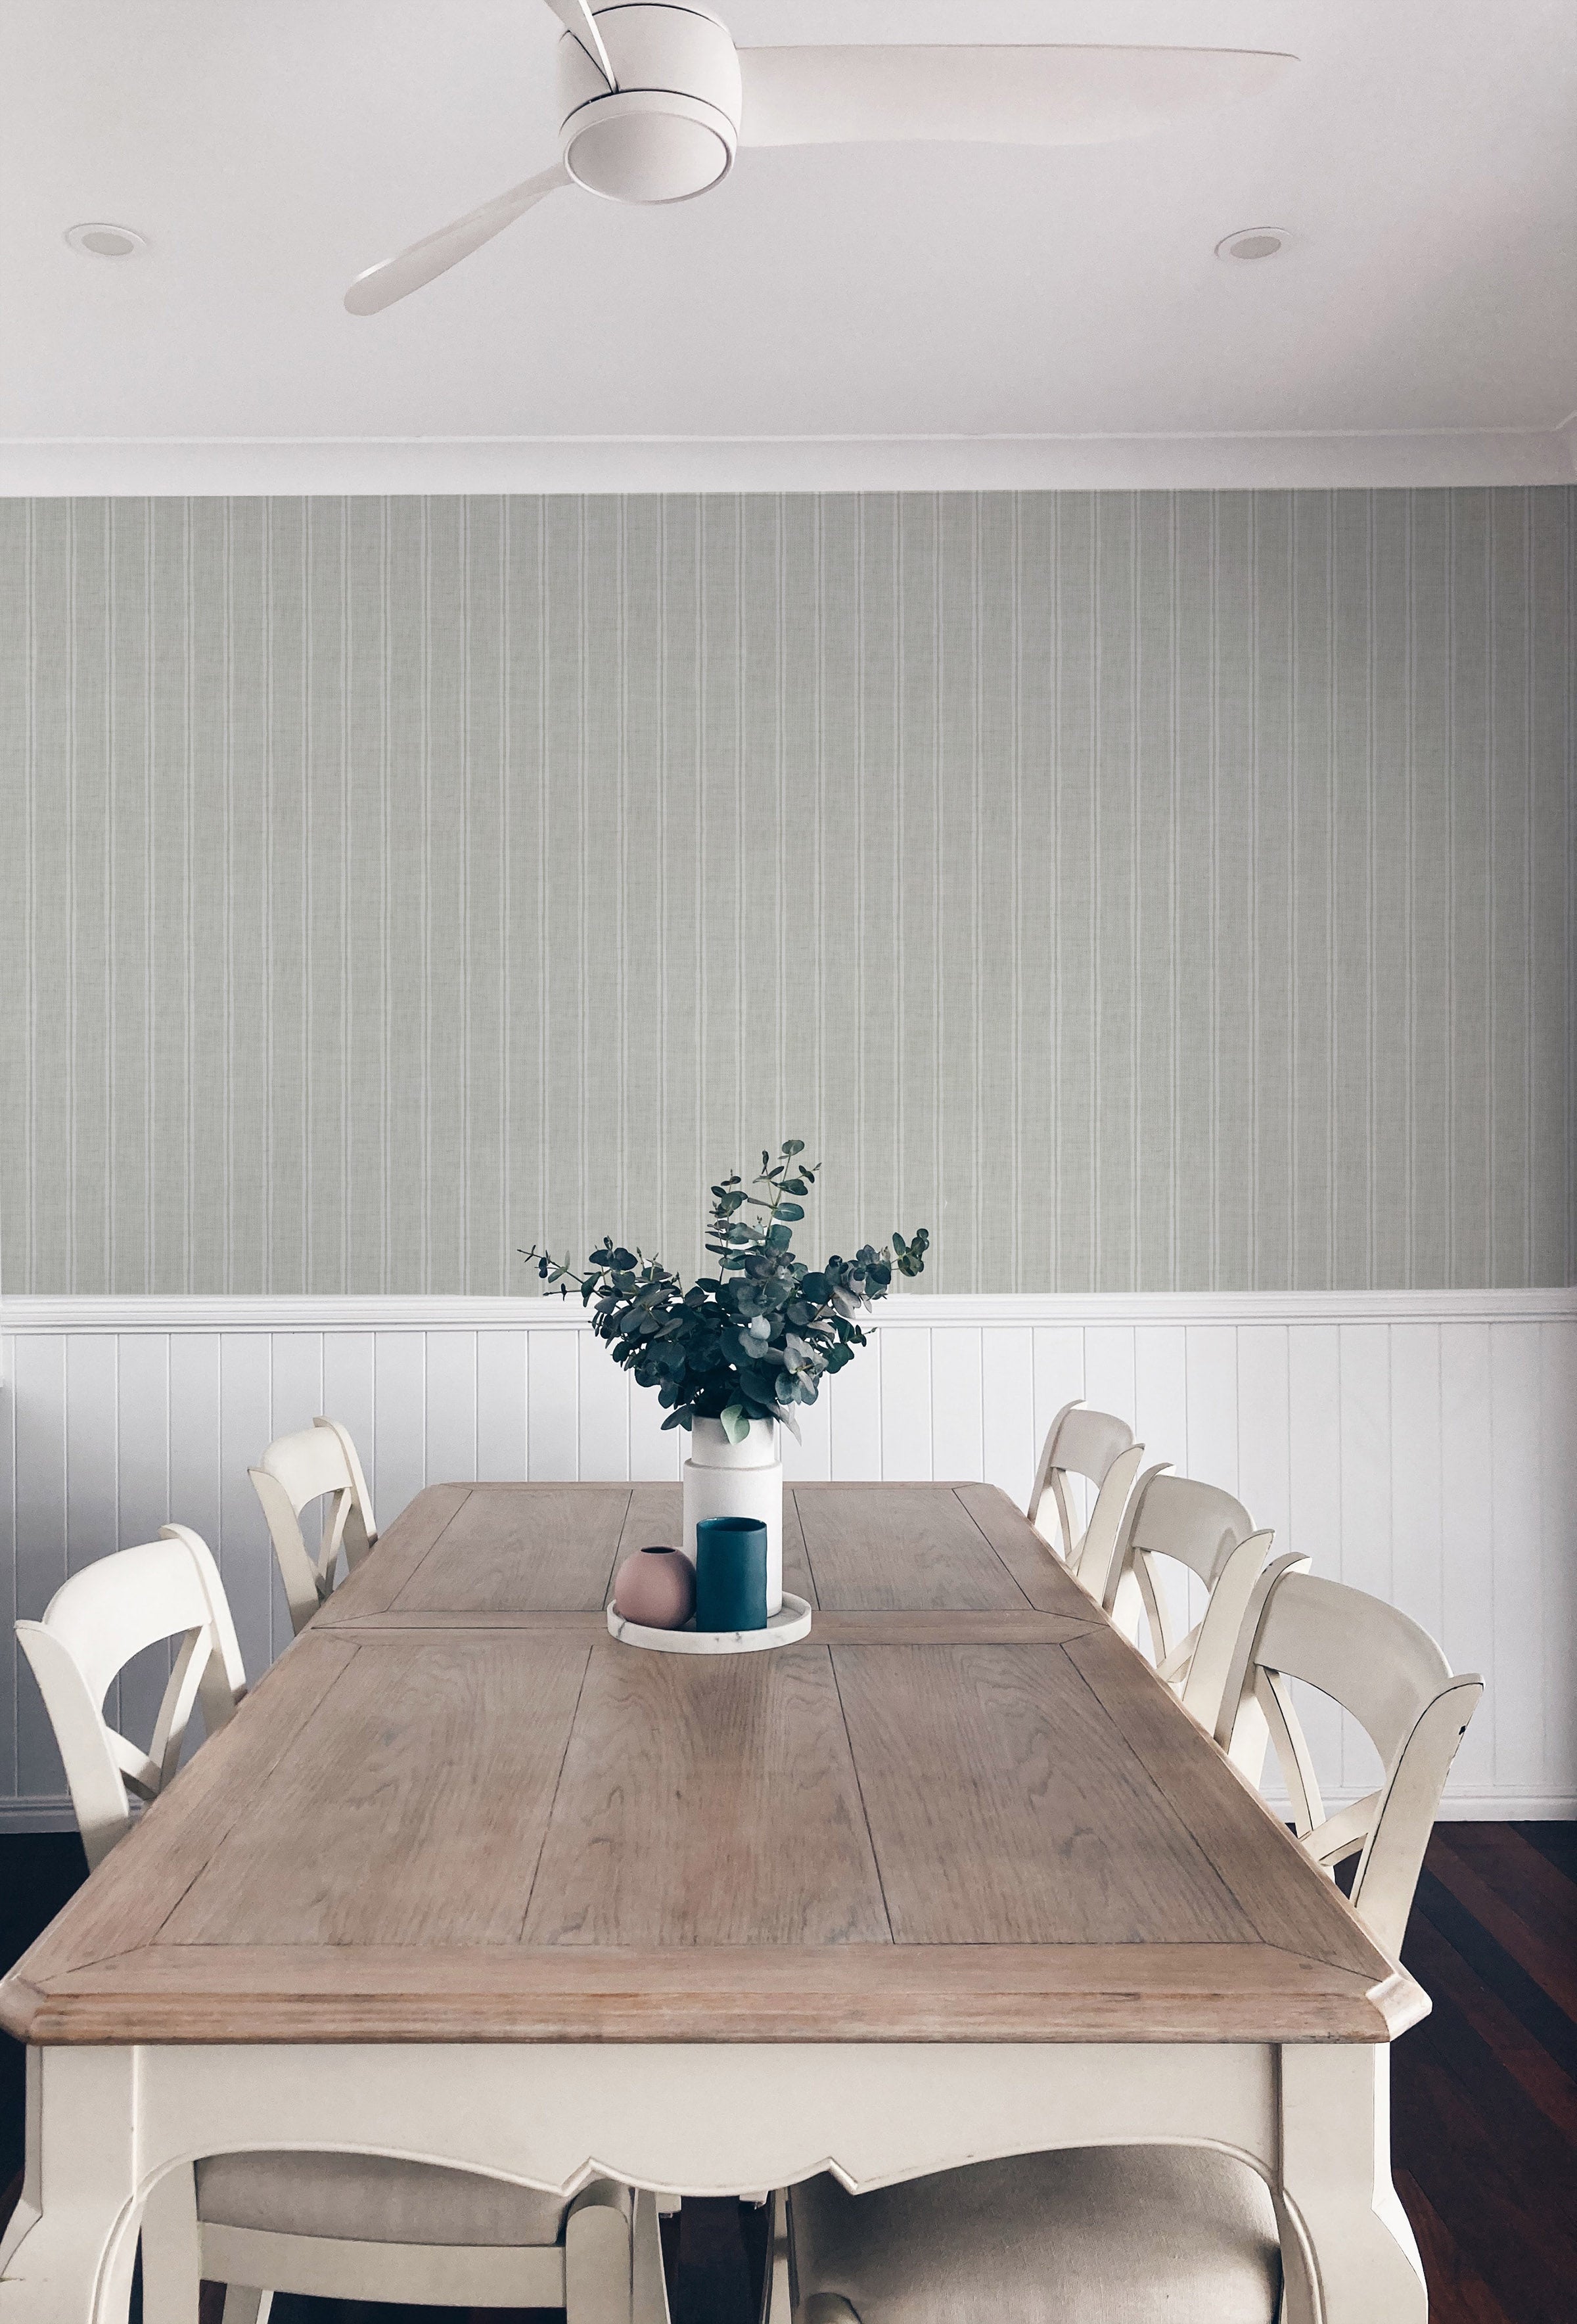 A rustic dining room scene is brought to life with the Olive Textured Striped Wallpaper, providing a serene backdrop with its subtle, textured vertical stripes in muted olive tones. The wallpaper pairs beautifully with the classic wooden dining table and white chairs, under a modern white ceiling fan.